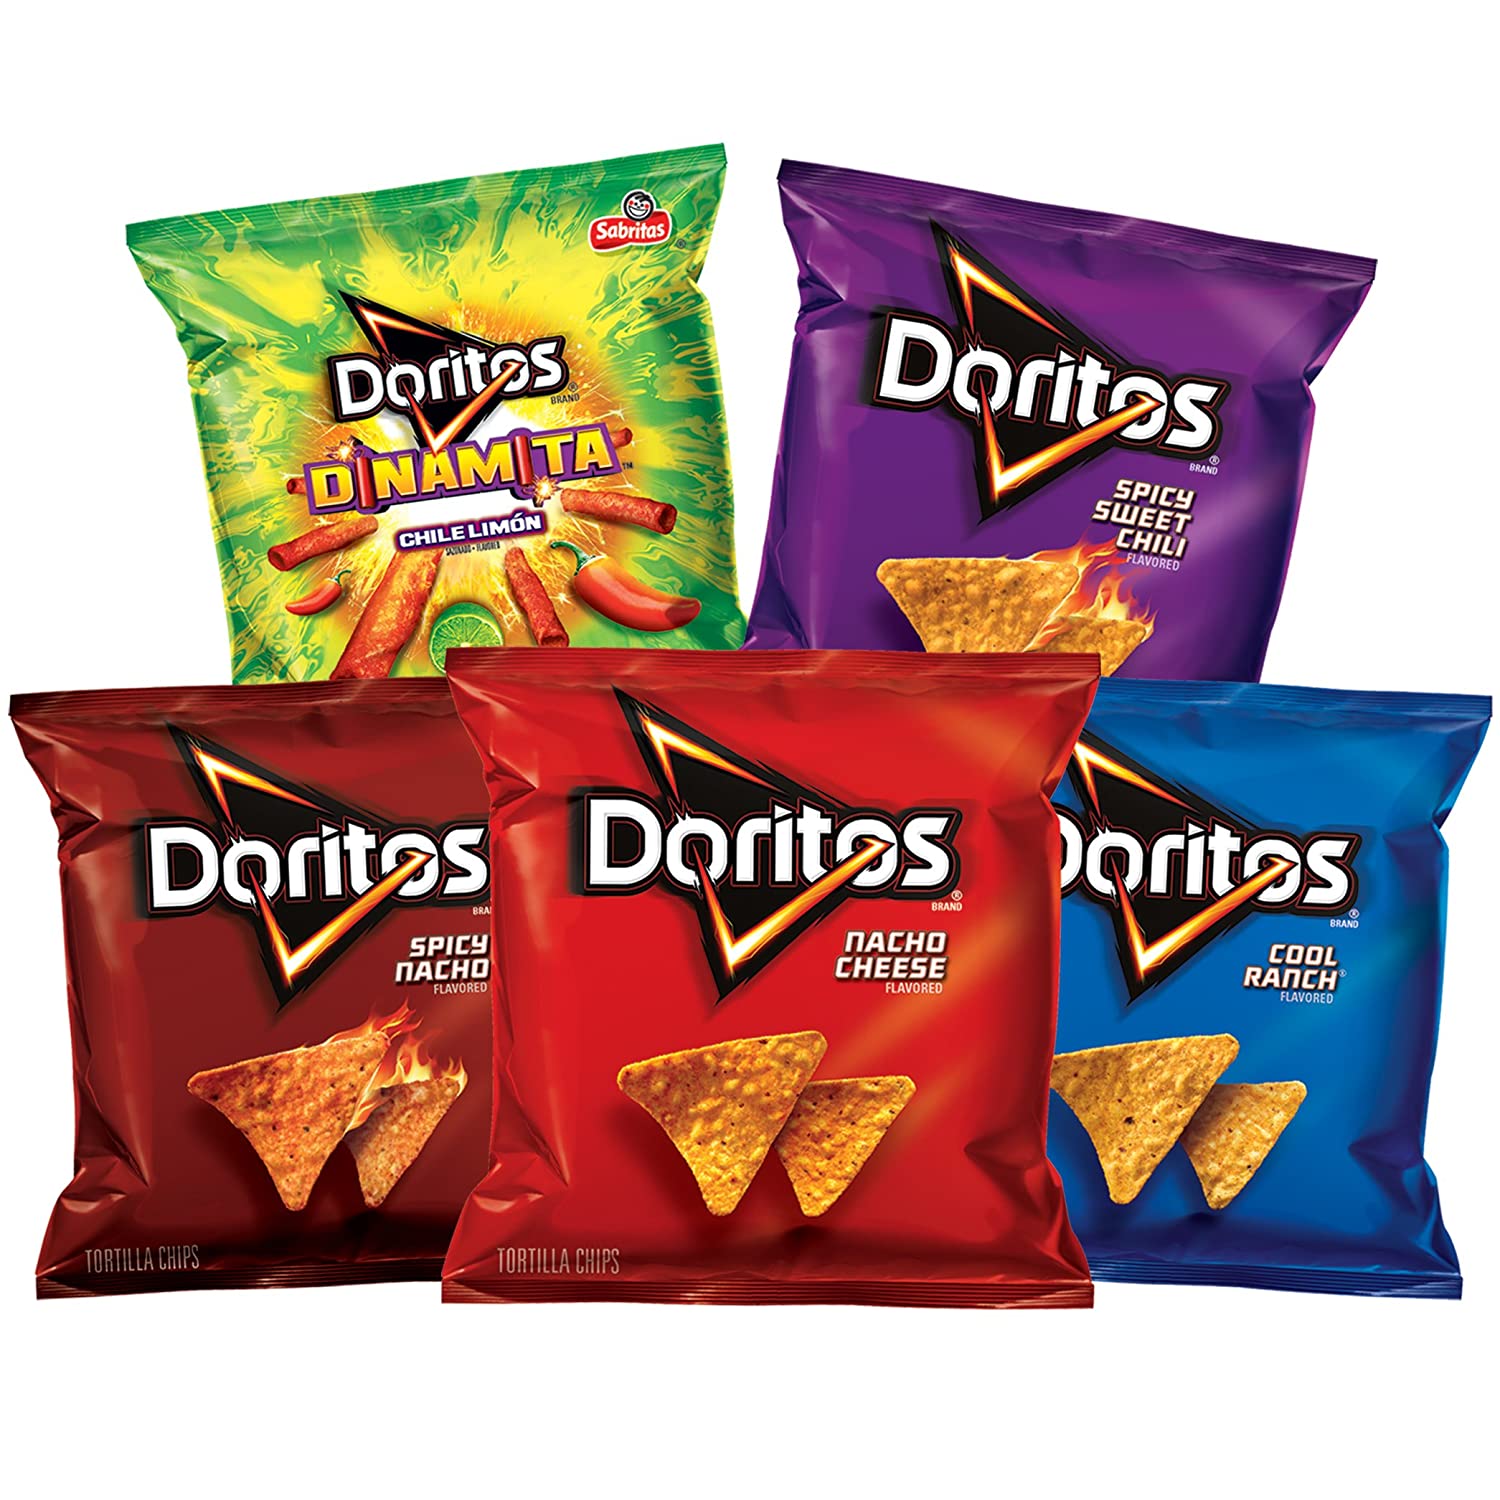 Doritos Flavored Tortilla Chip Variety Pack, 40 Count - image 5 of 6